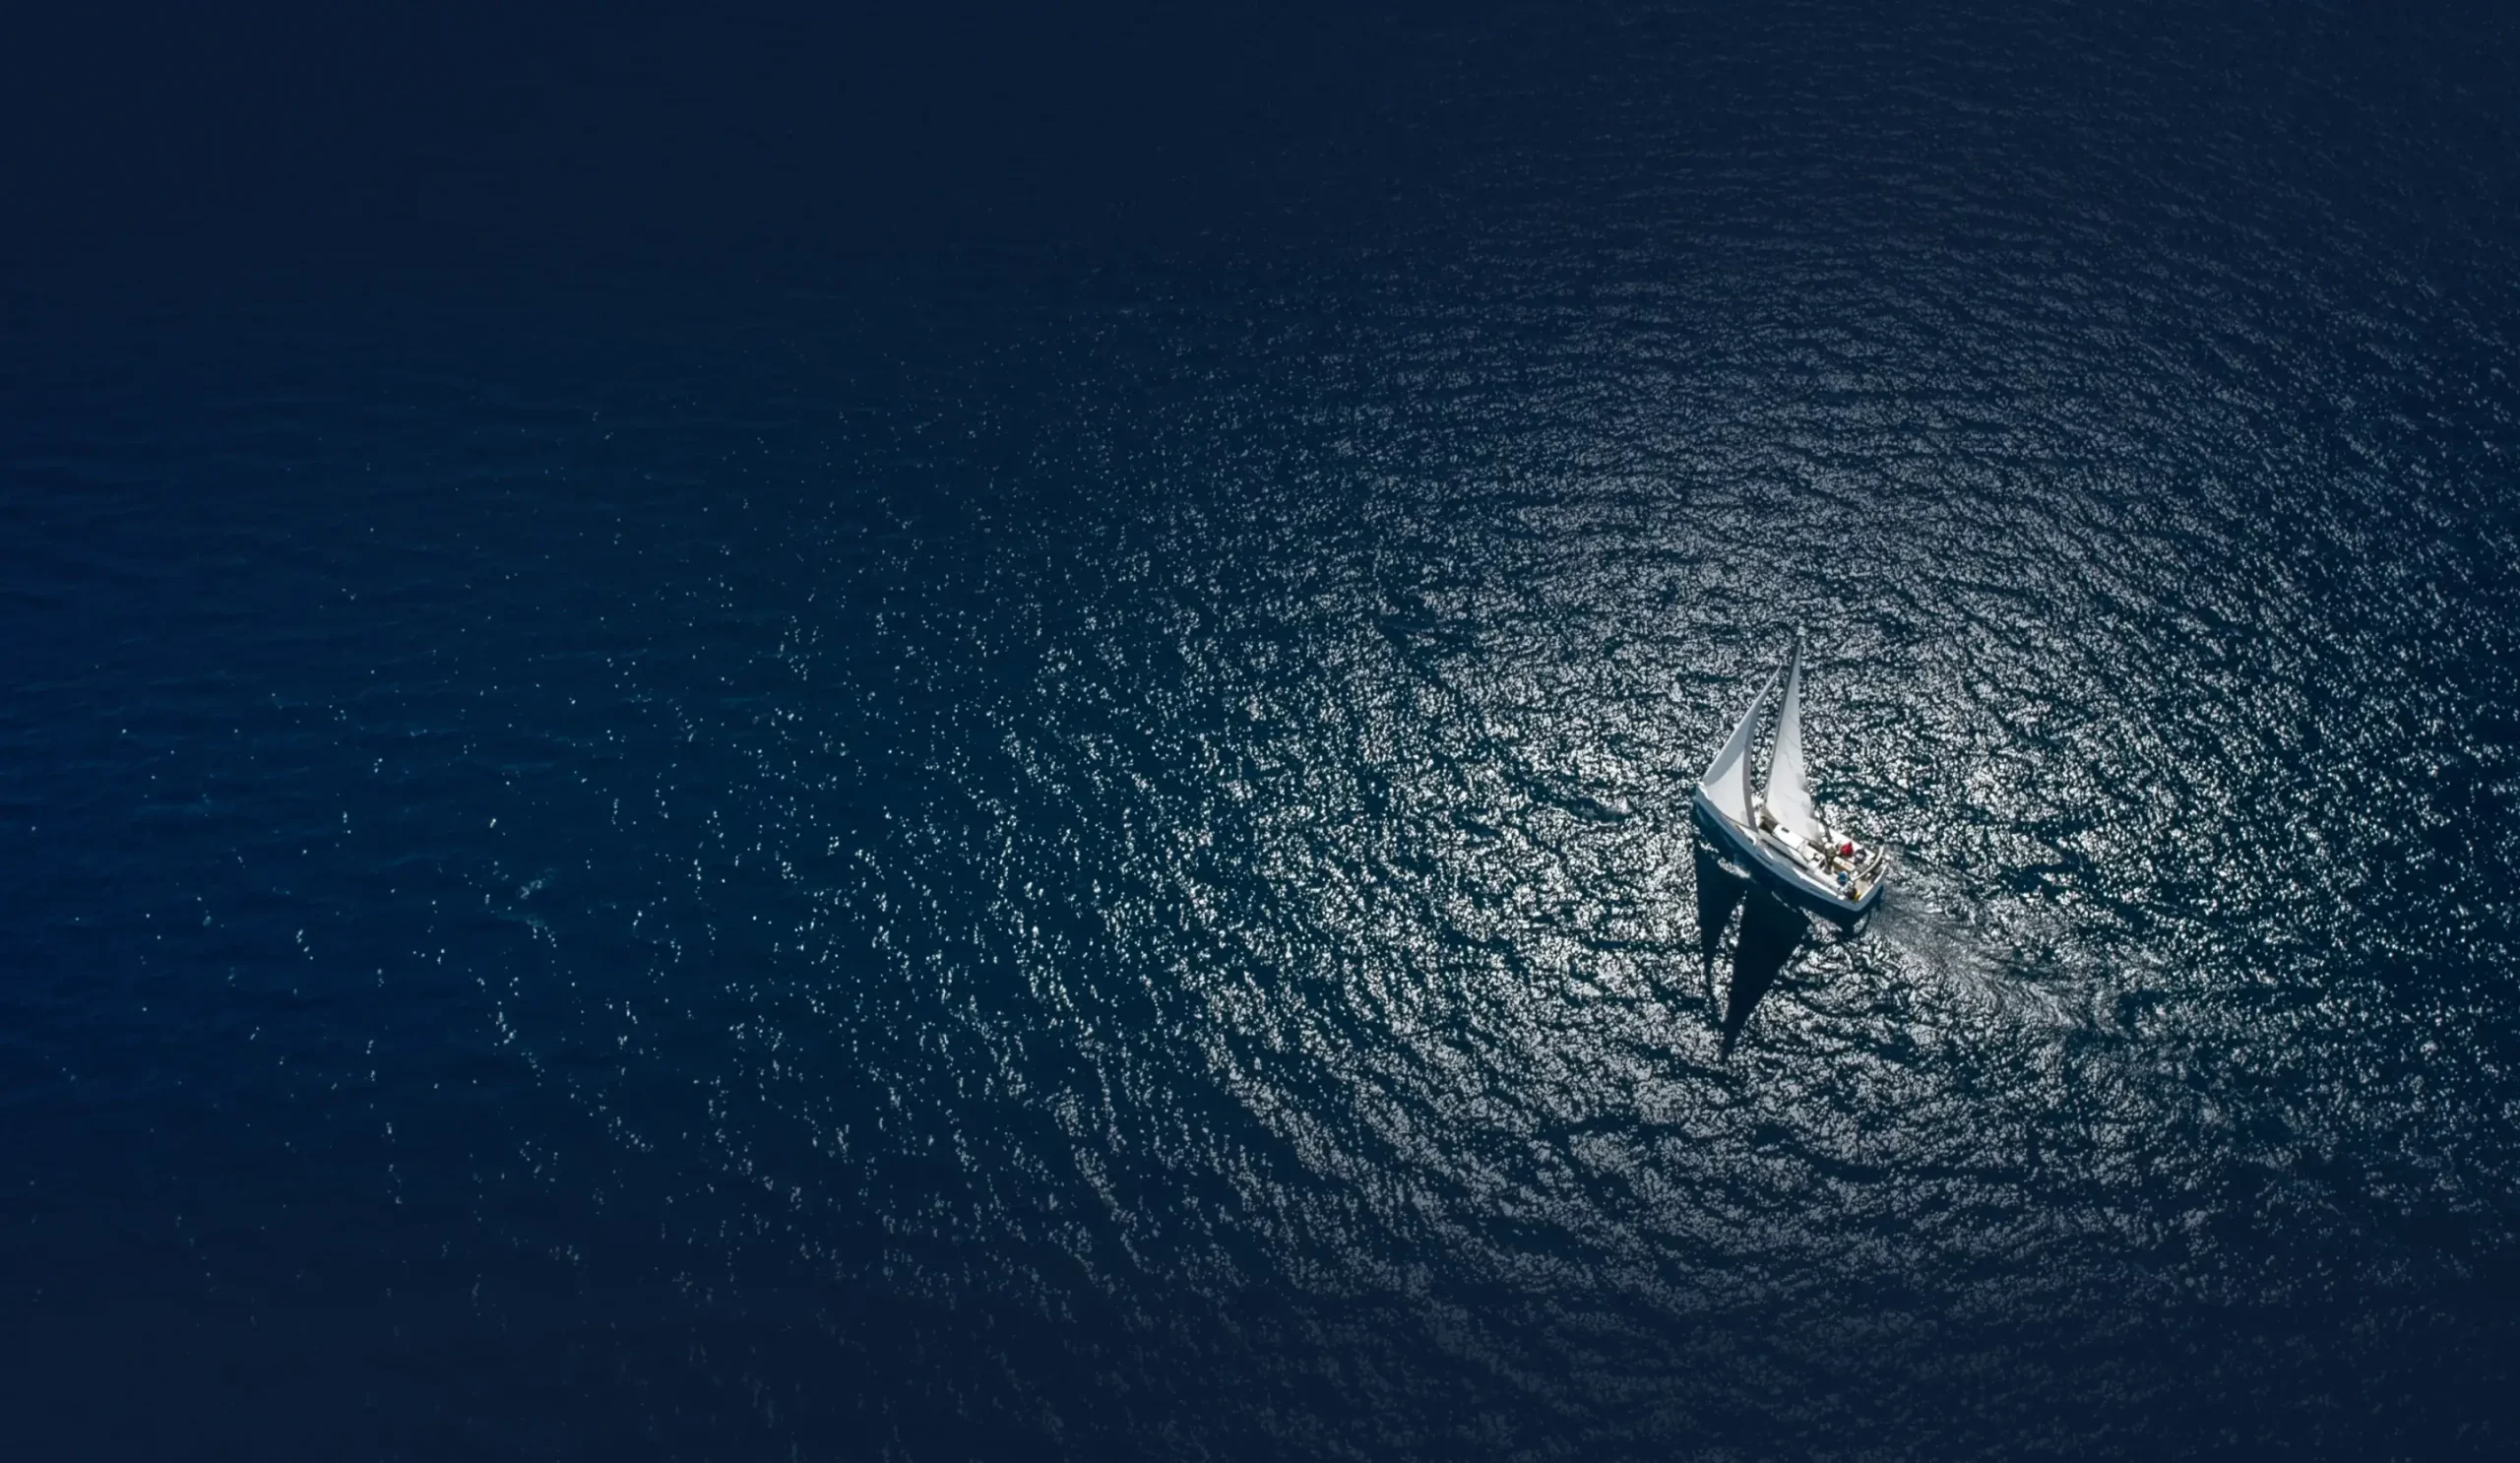 overhead view of sailboat in open water